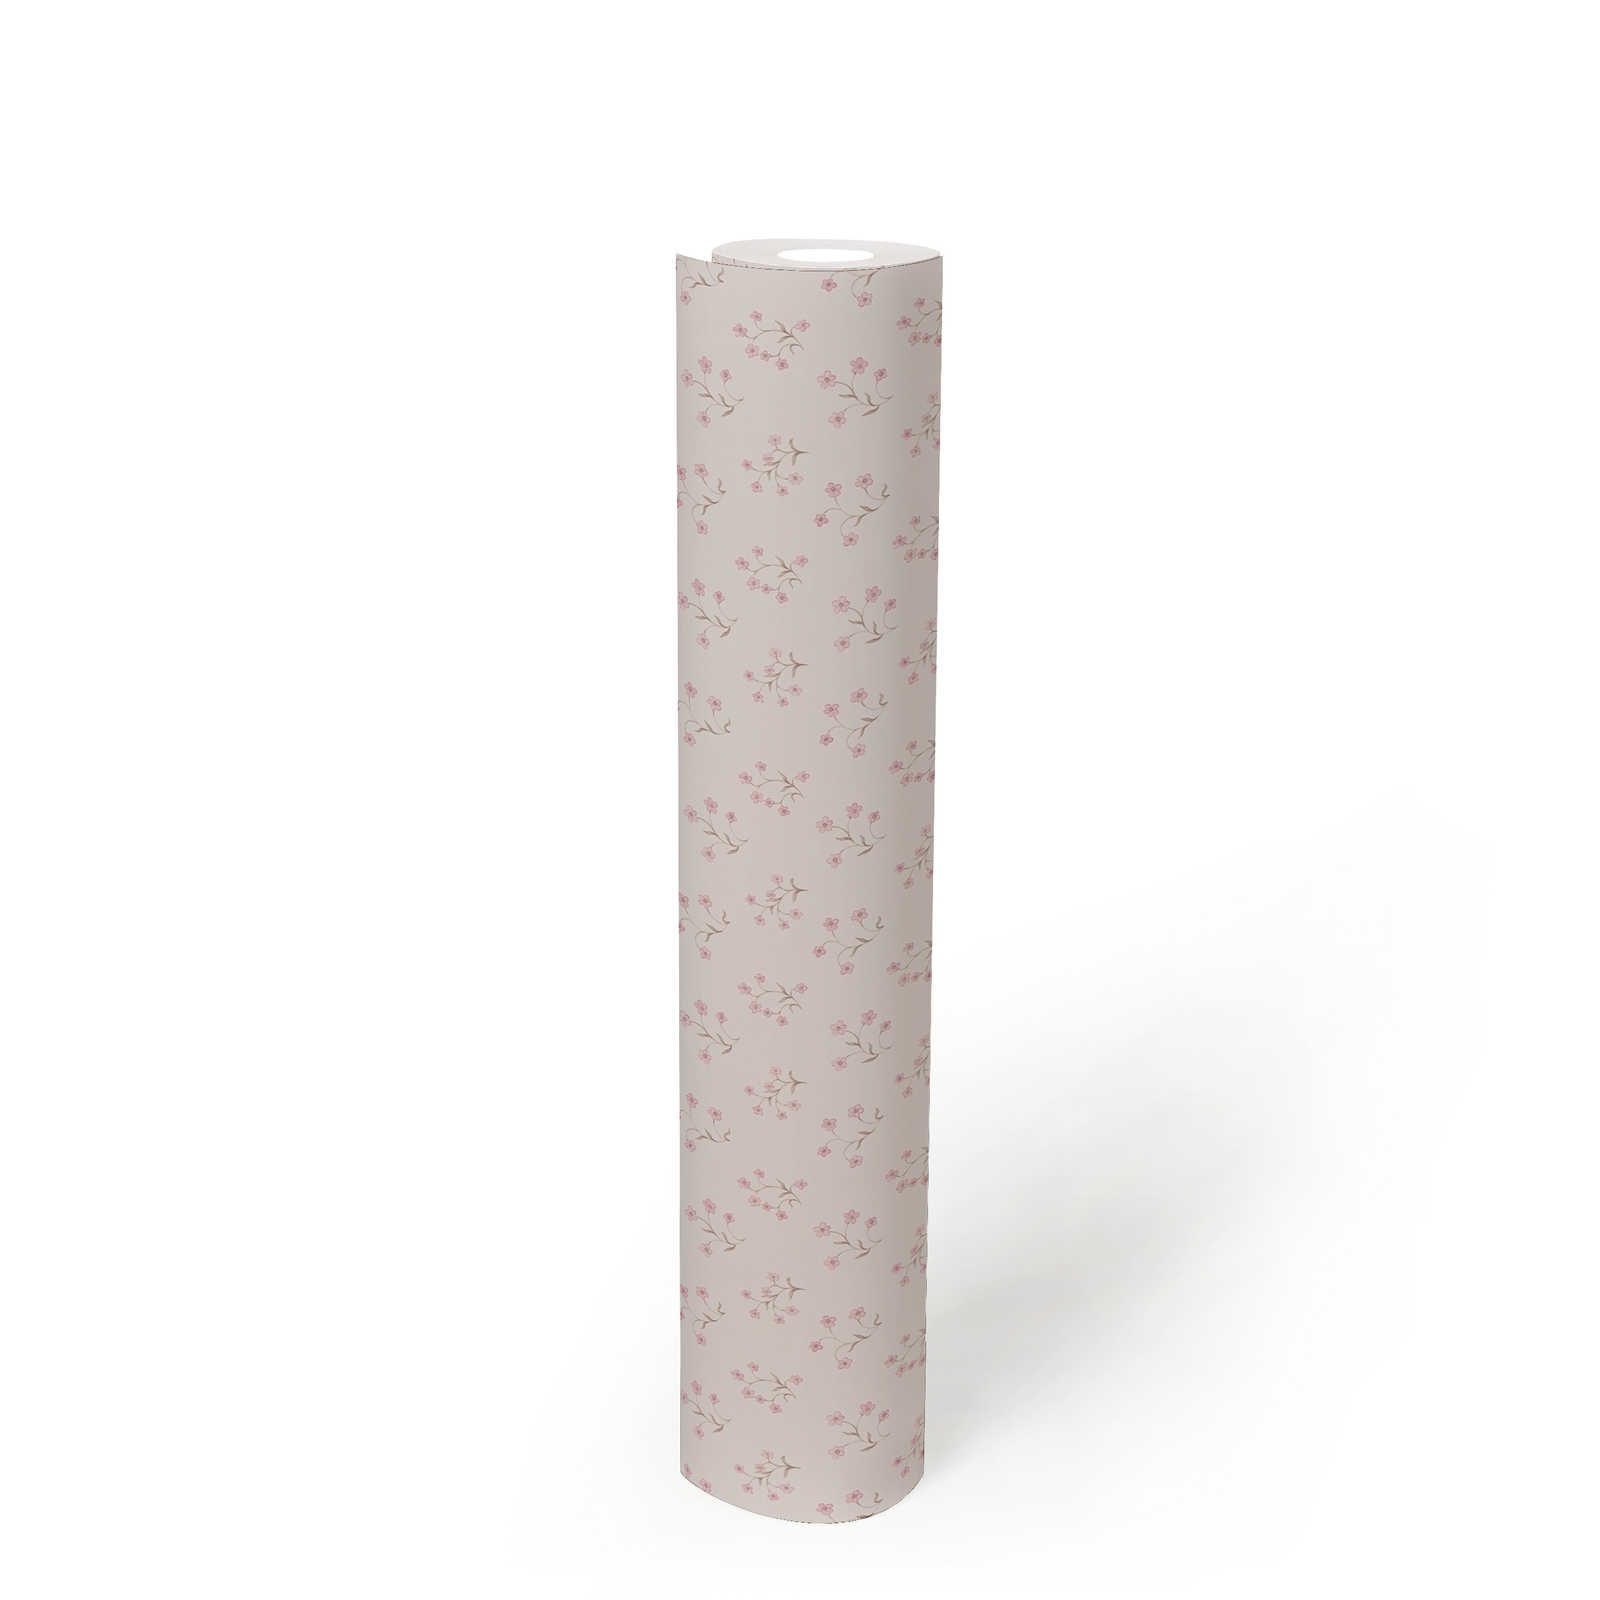             Non-woven wallpaper floral country house pattern with flowers - cream, pink, beige
        